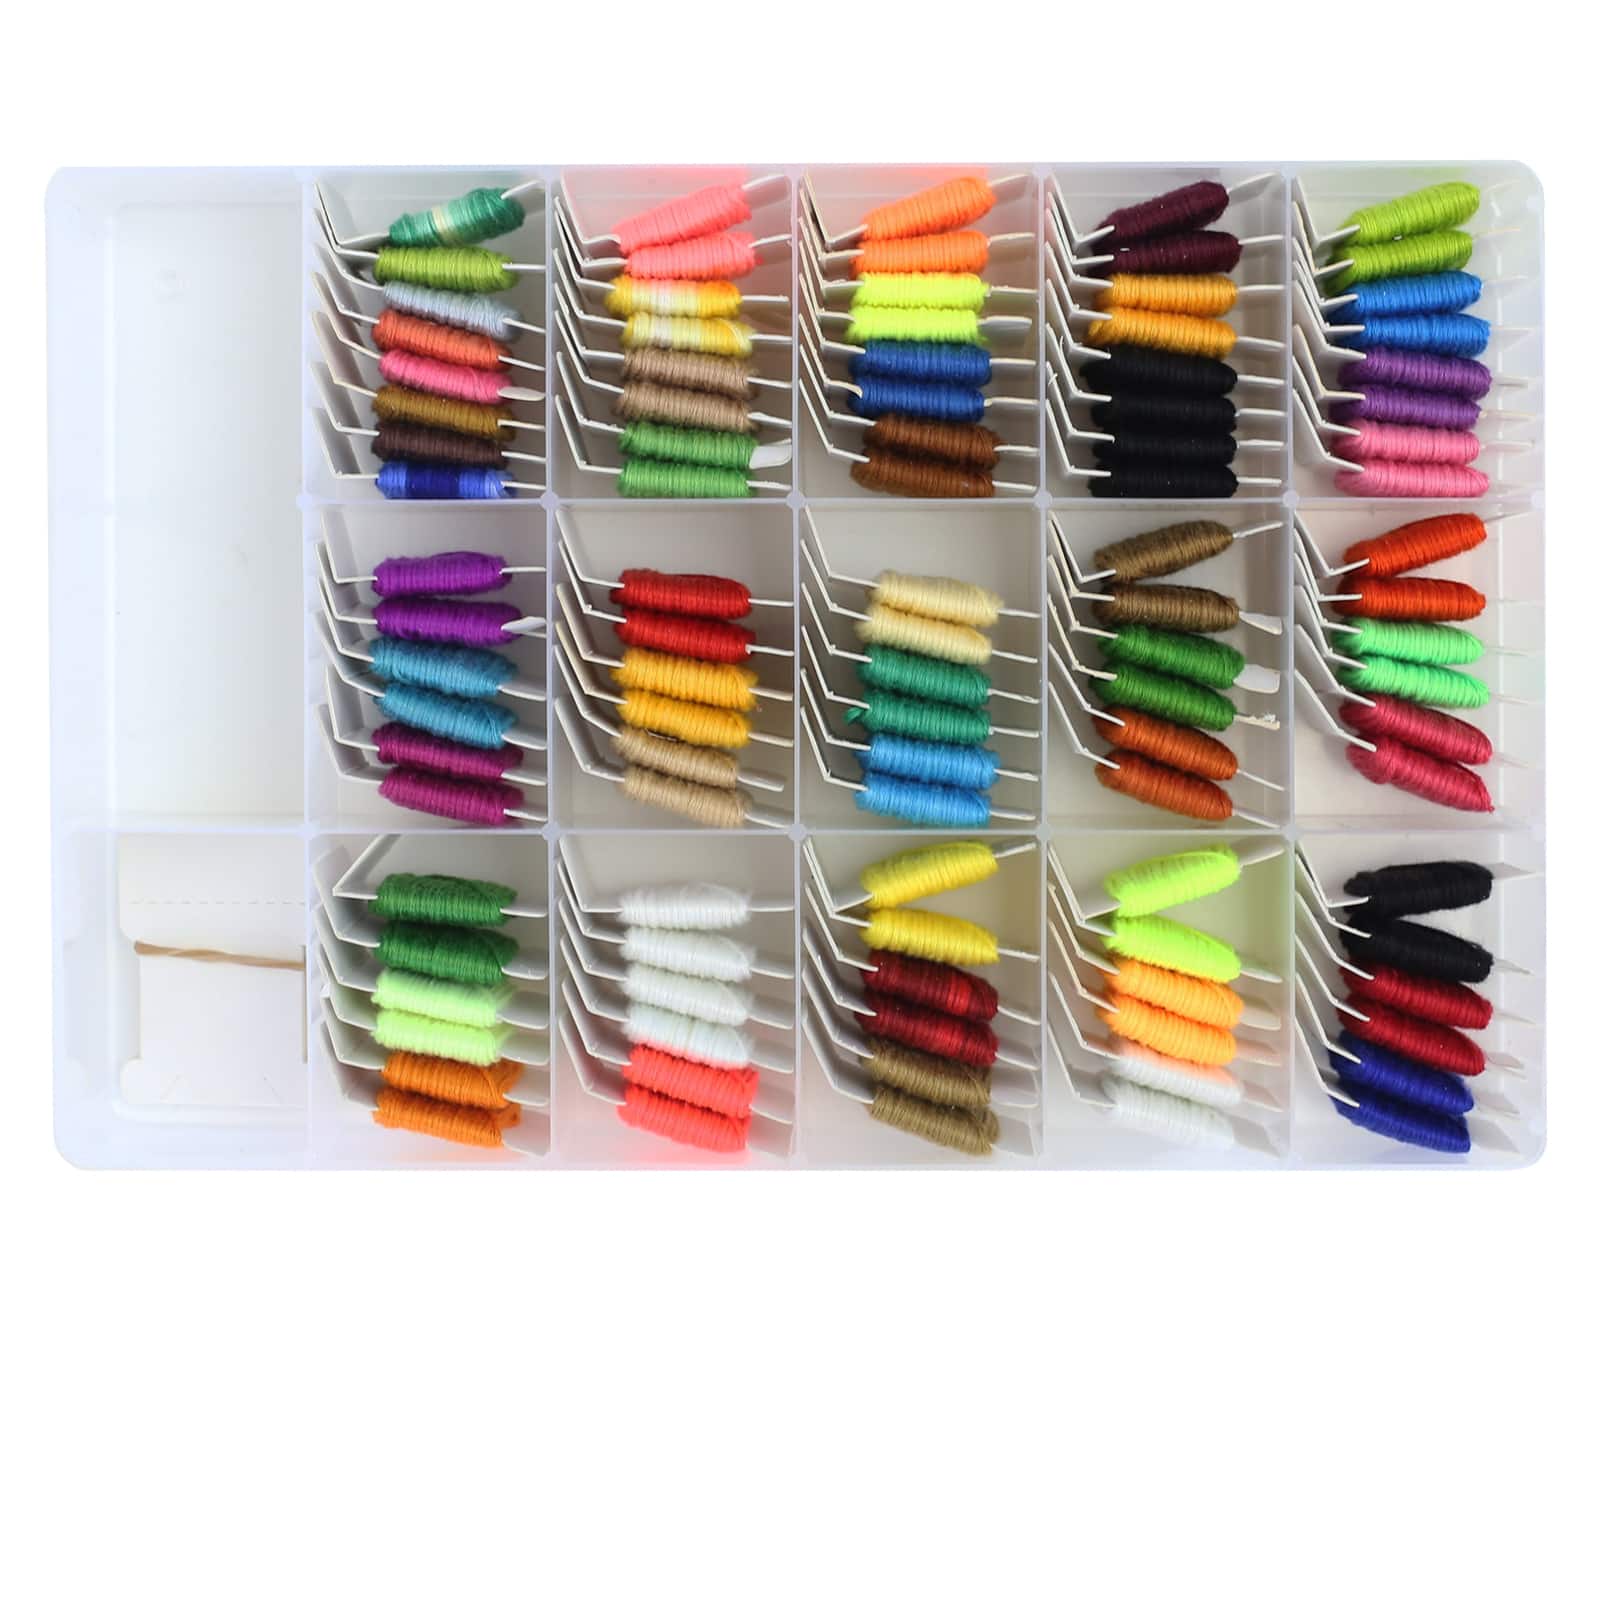 Peirich 201 Pack Embroidery Floss Kit, Includes Embroidery Threads 3-Tier  Organizer Box Embroidery Kits for Friendship Bracelets Cross stitch DIY